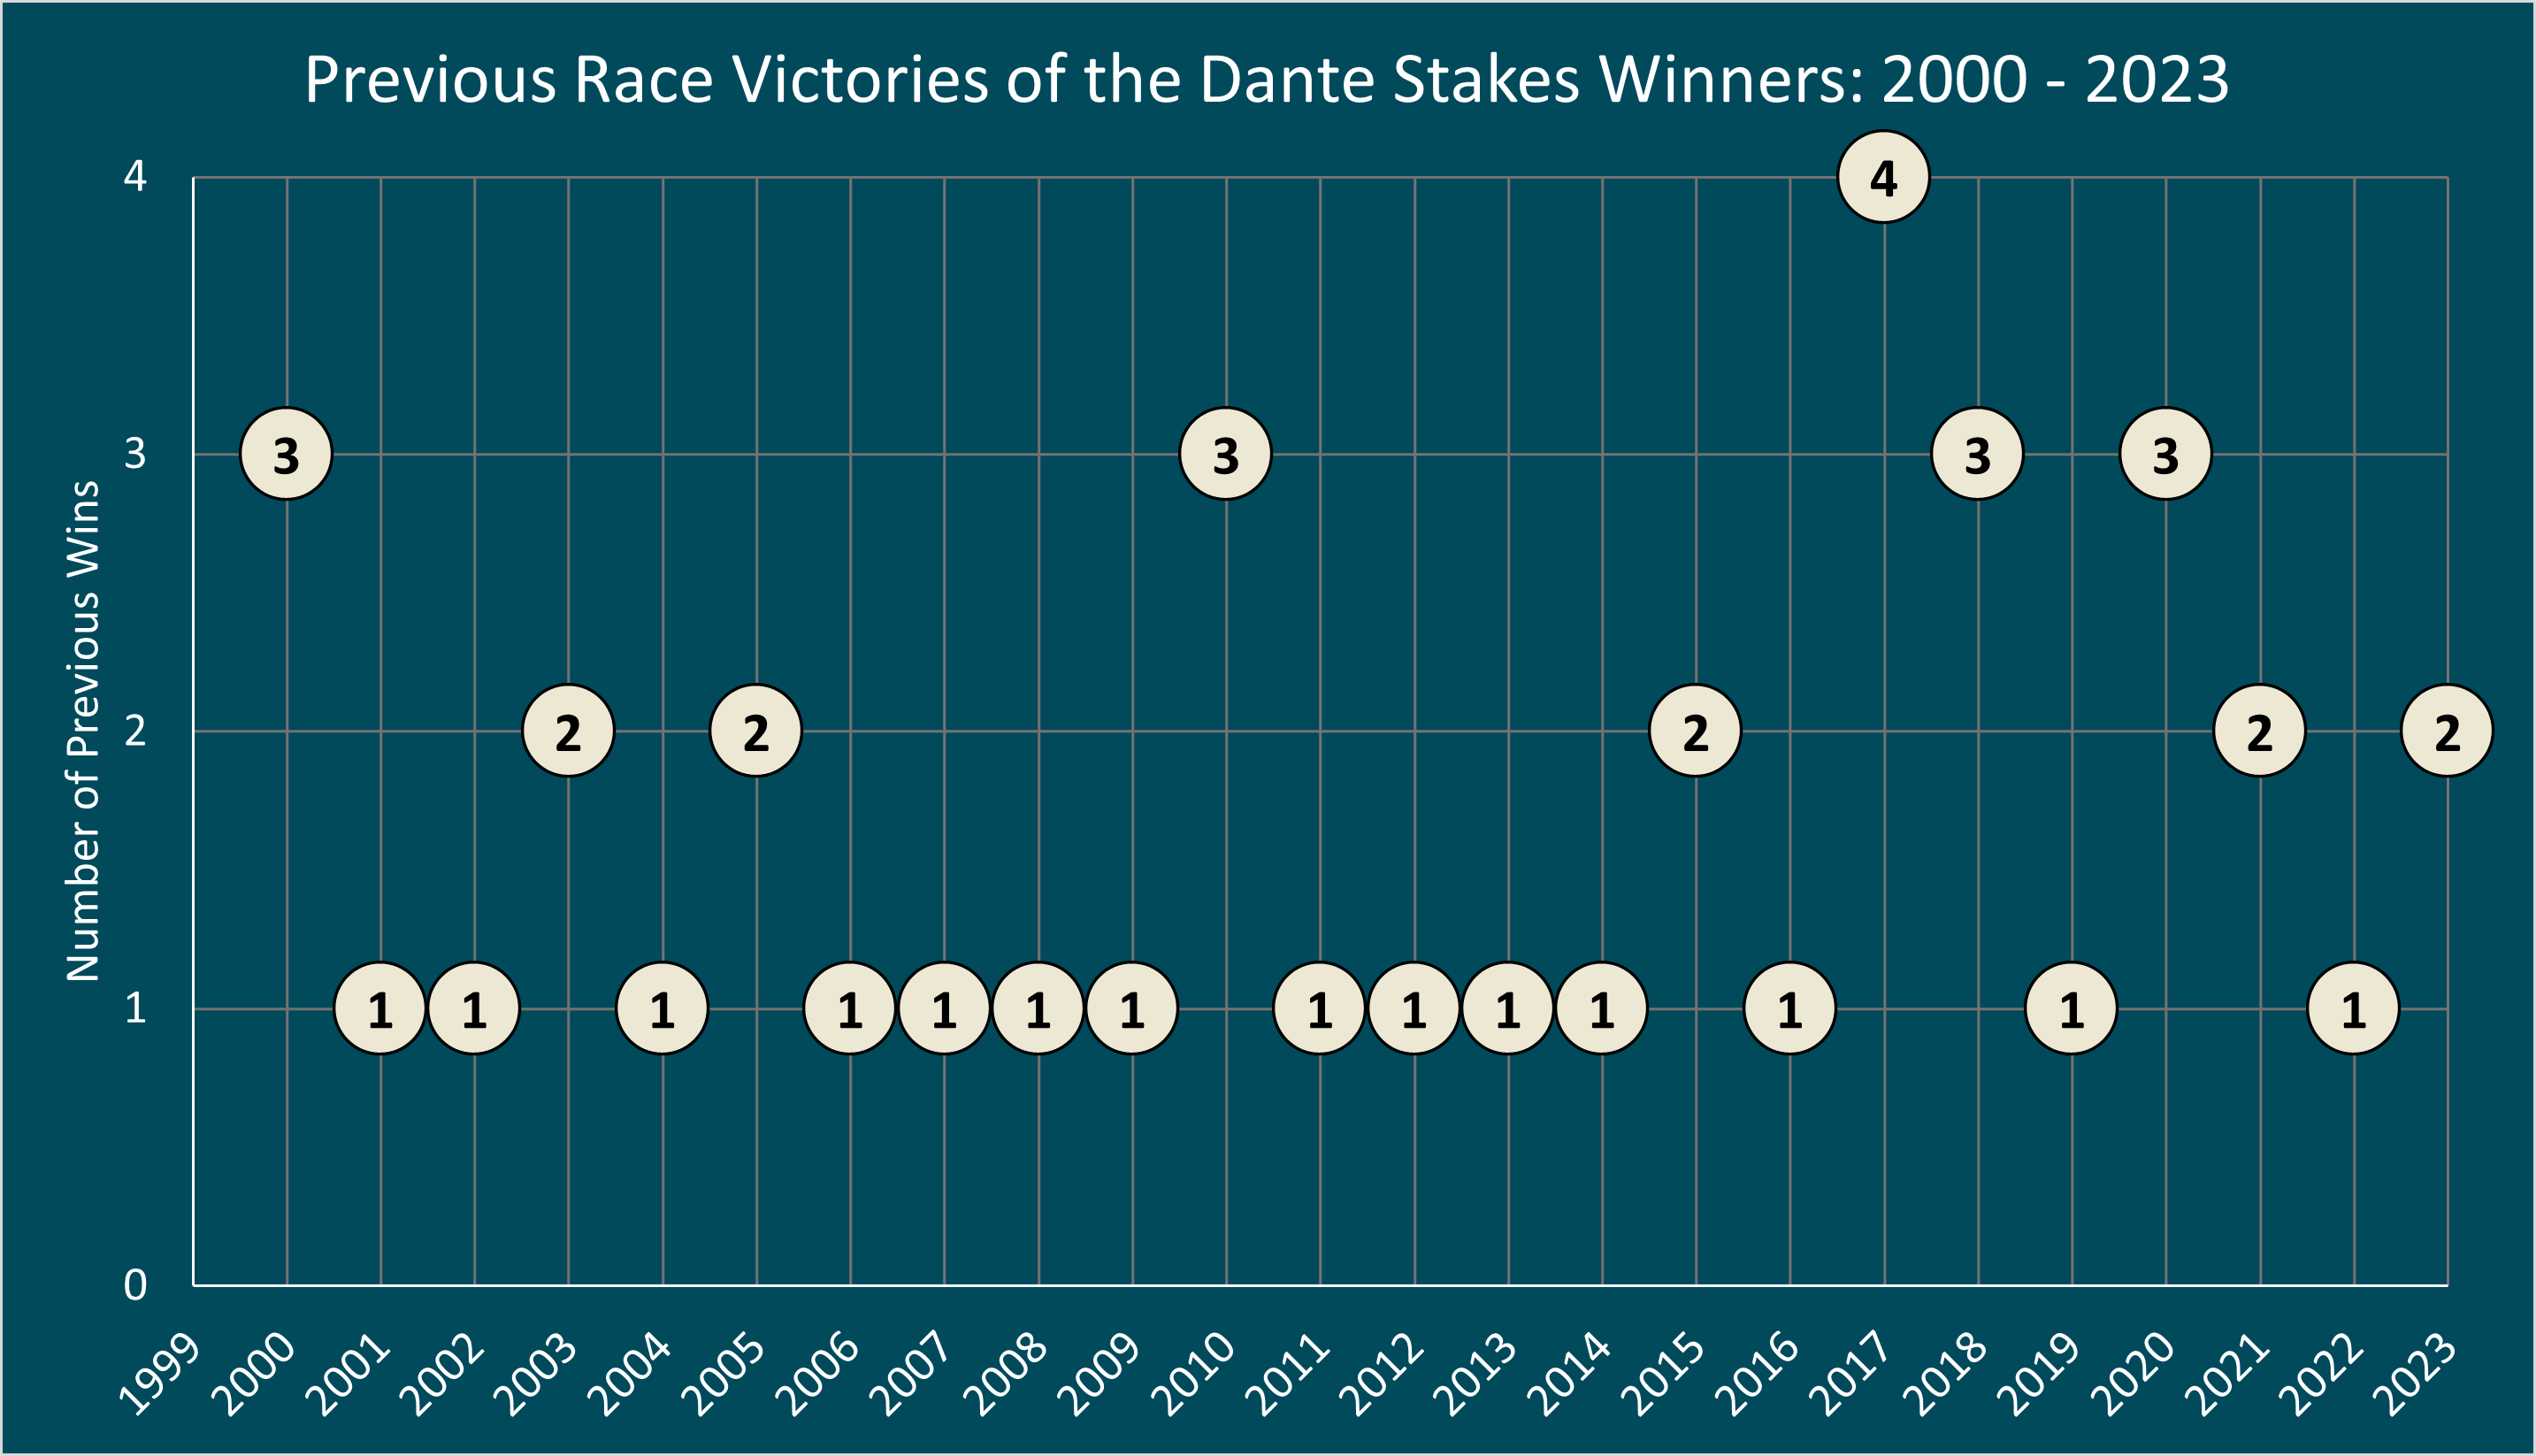 Chart Showing the Number of Previous Wins the Dante Stakes Winners Had Between 2000 and 2023